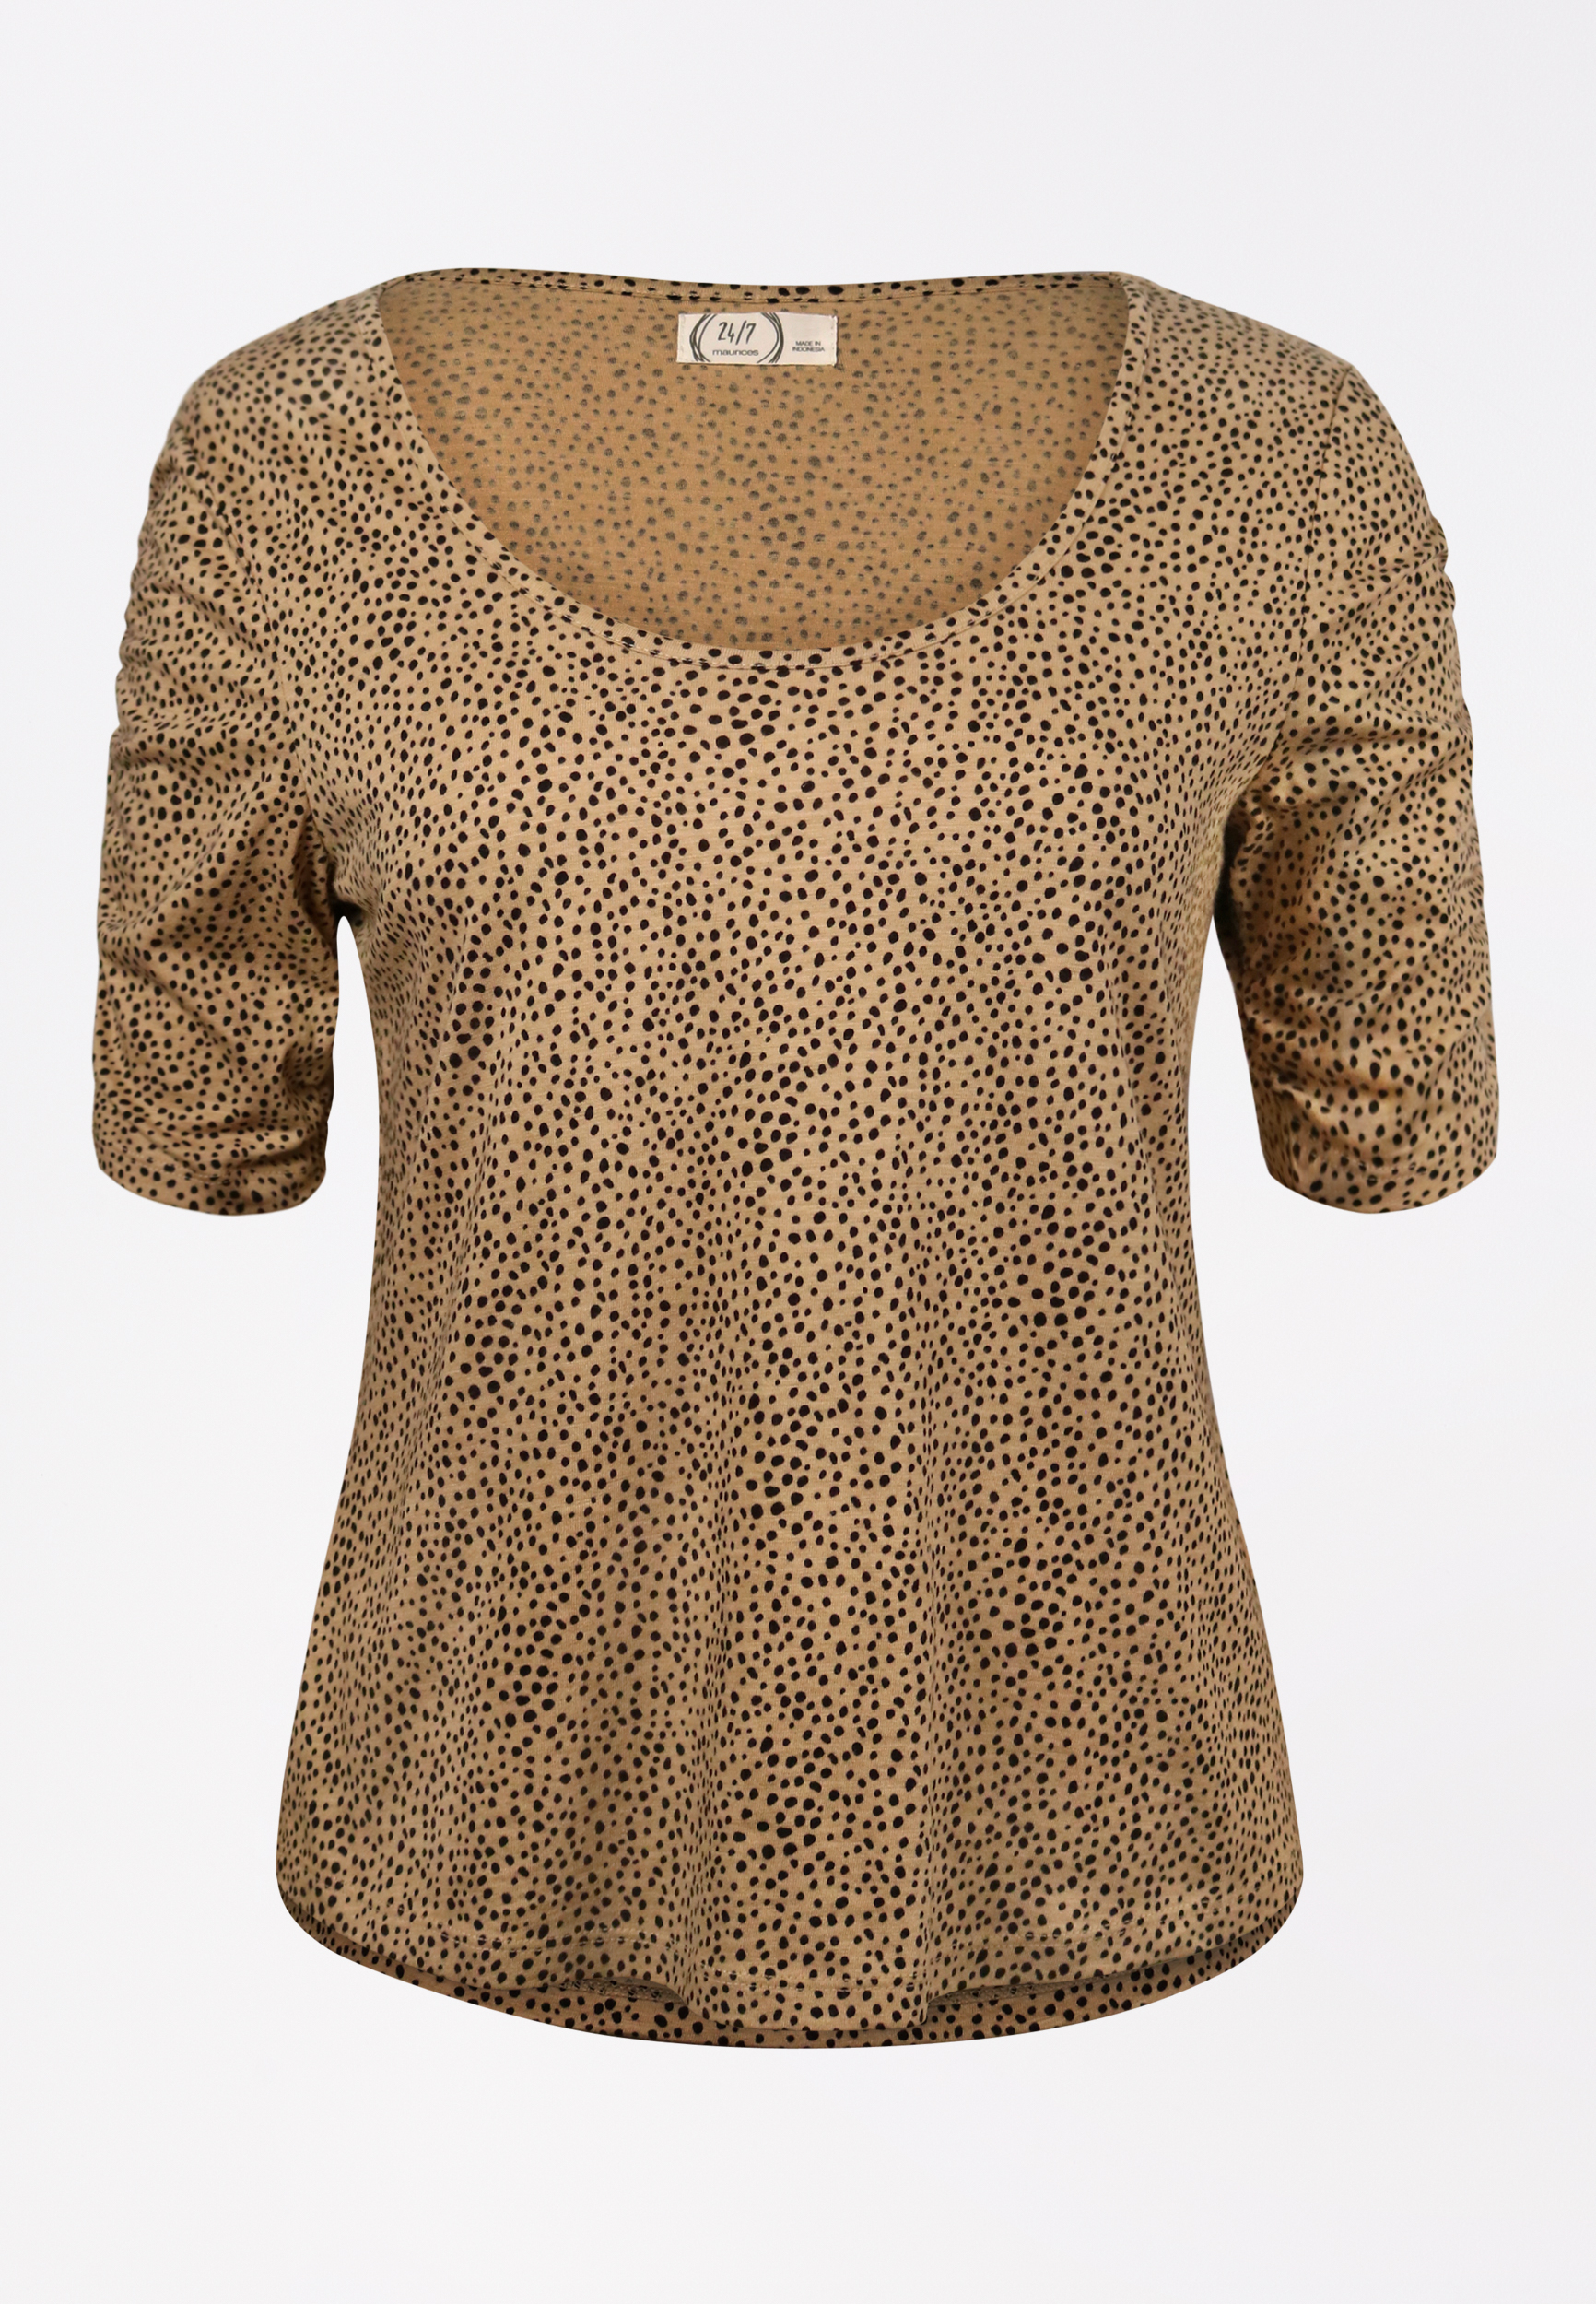 24/7 Animal Print Rouched Sleeve Tee | maurices